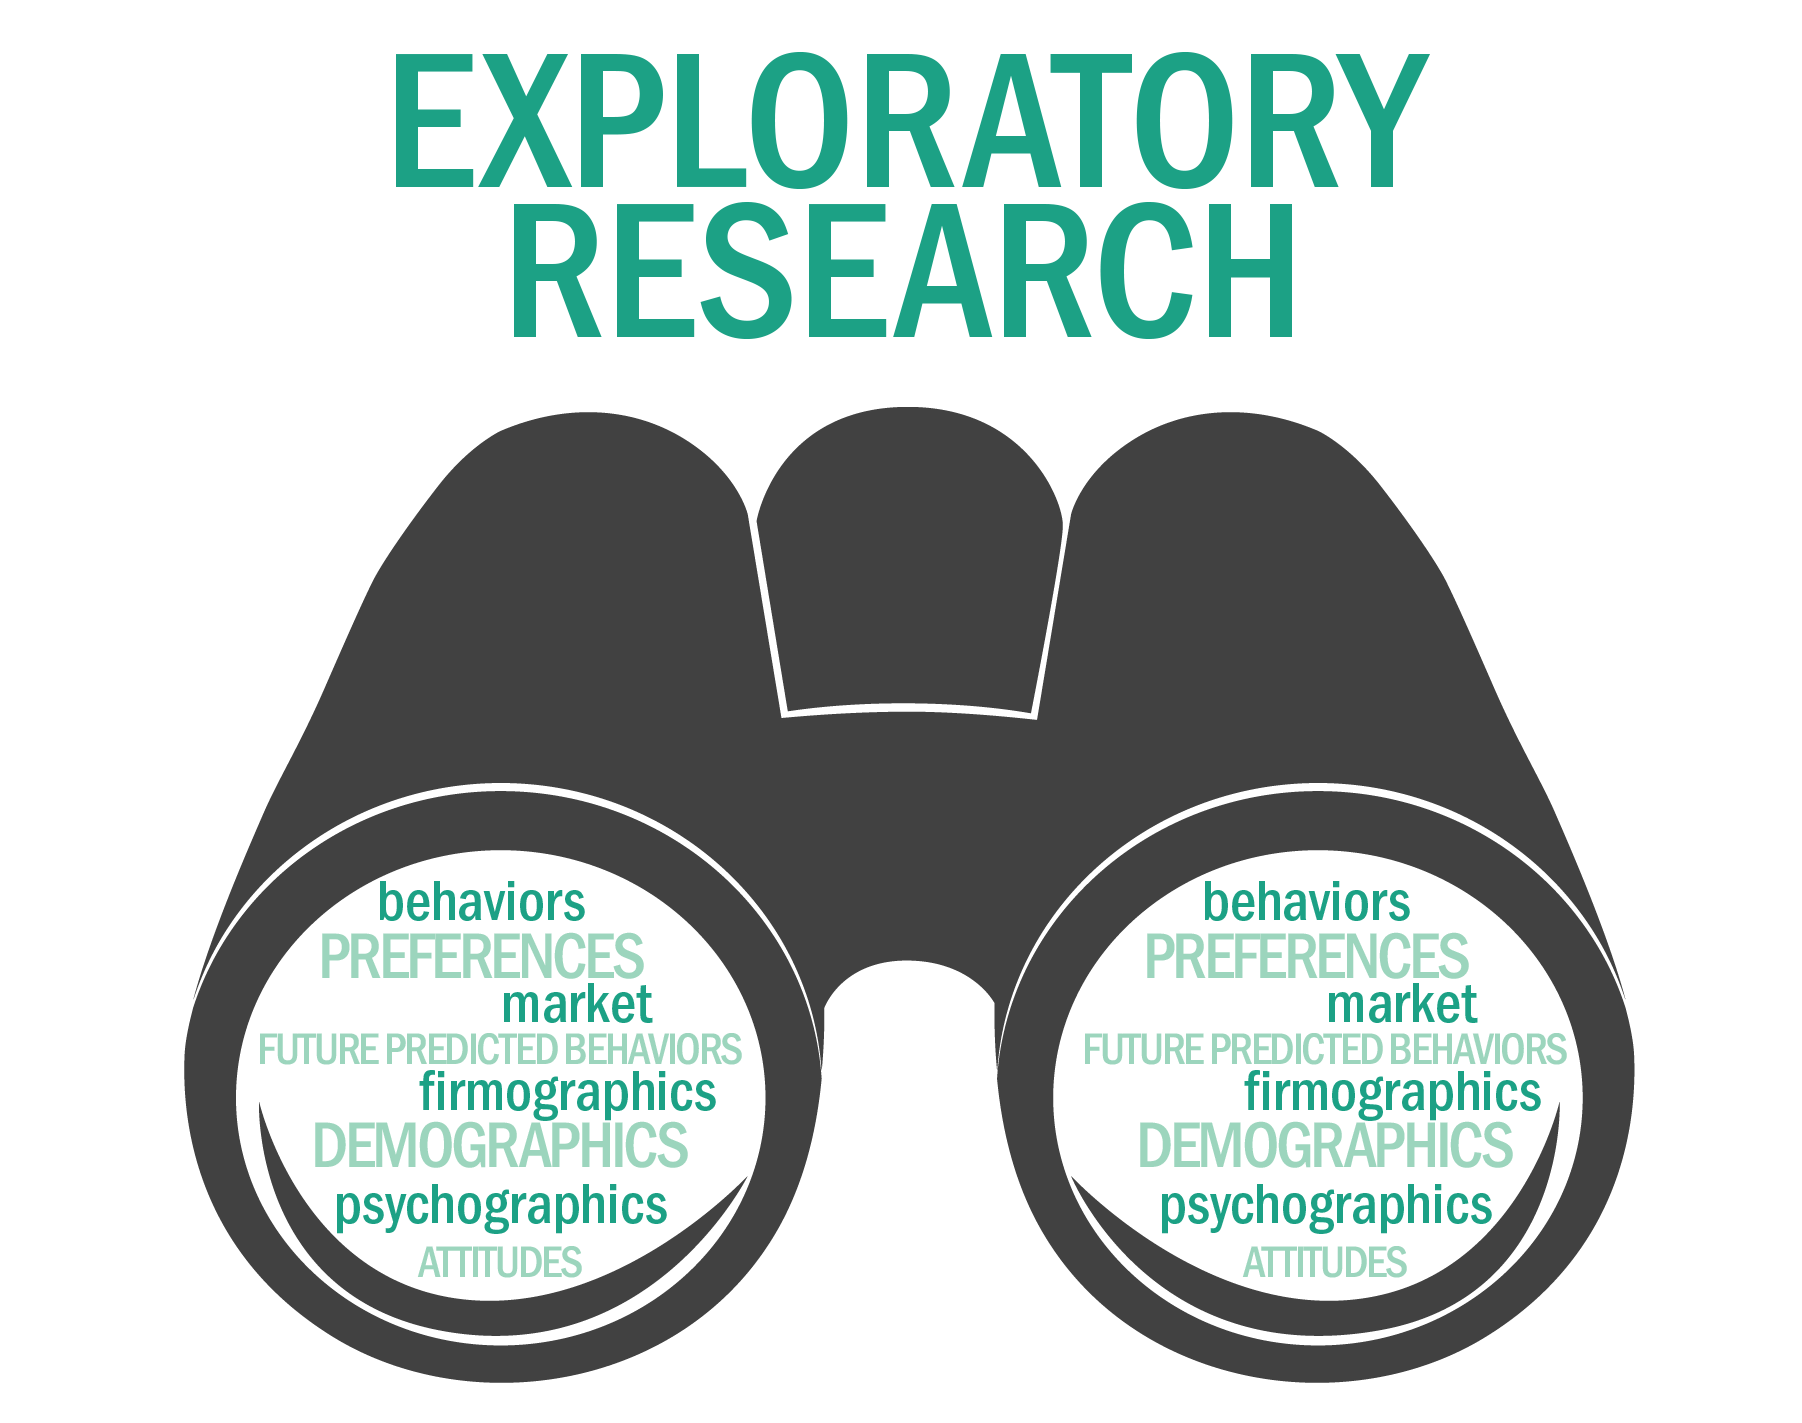 Exploratory Research